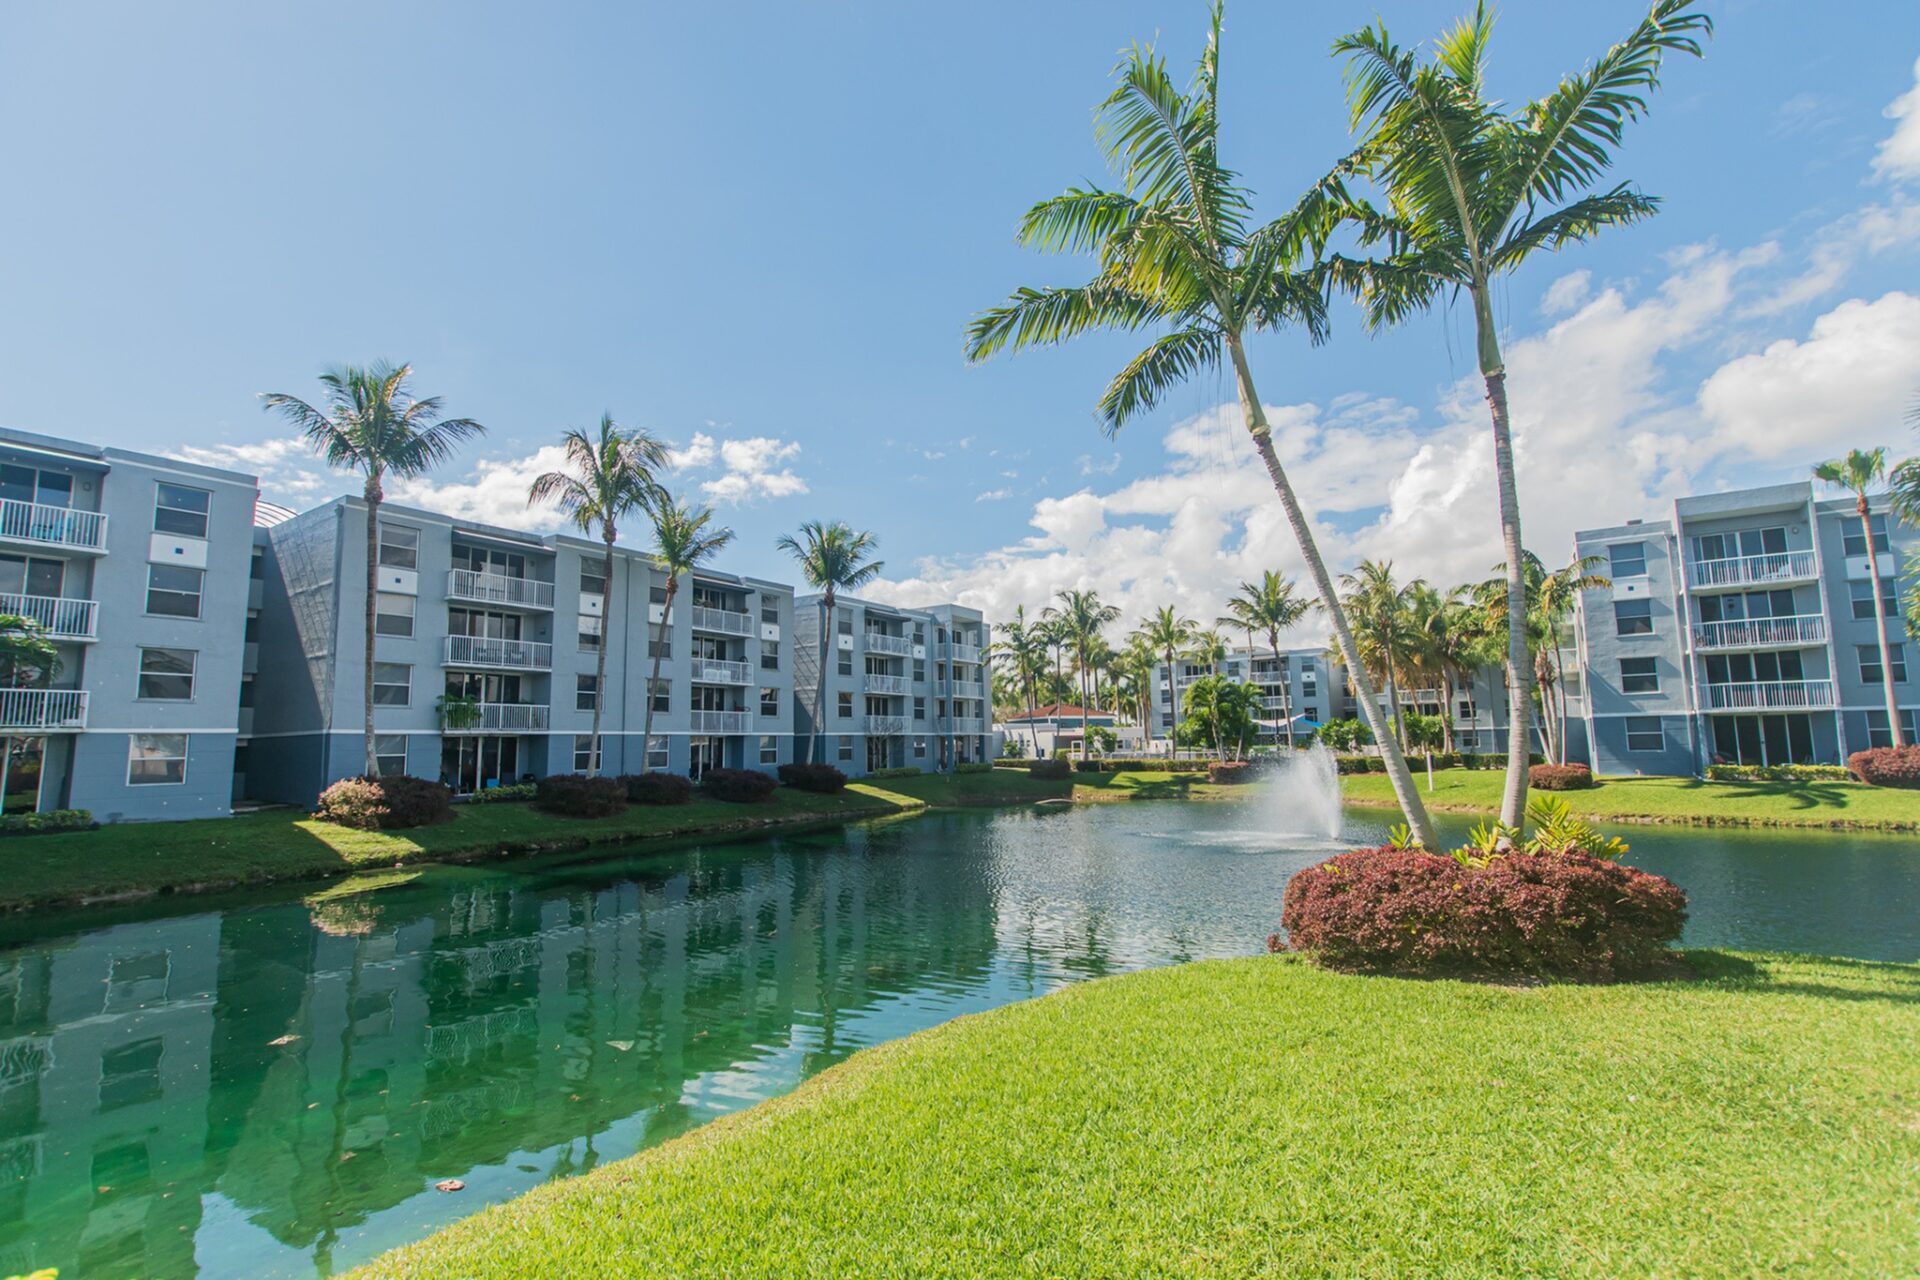 Beachwalk at Sheridan apartment buildings and palm trees surrounding a body of water with a fountain in the middle.